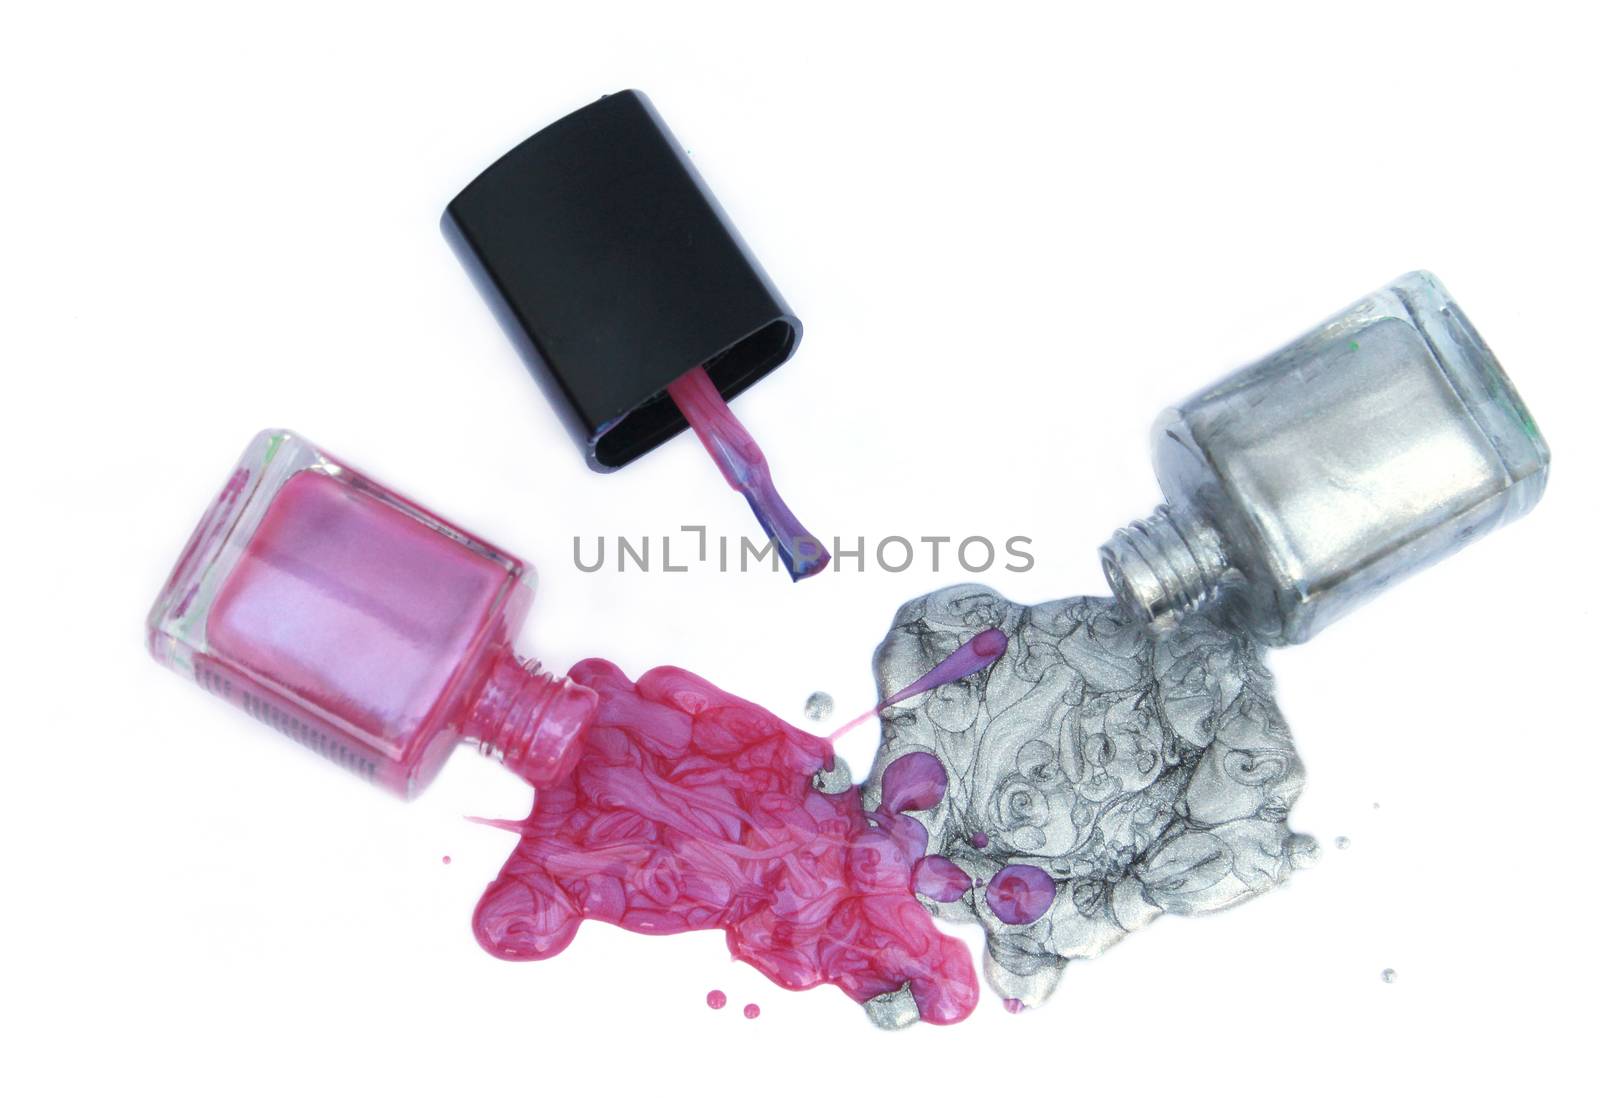 Pink and Silver Nail Polish on White Background